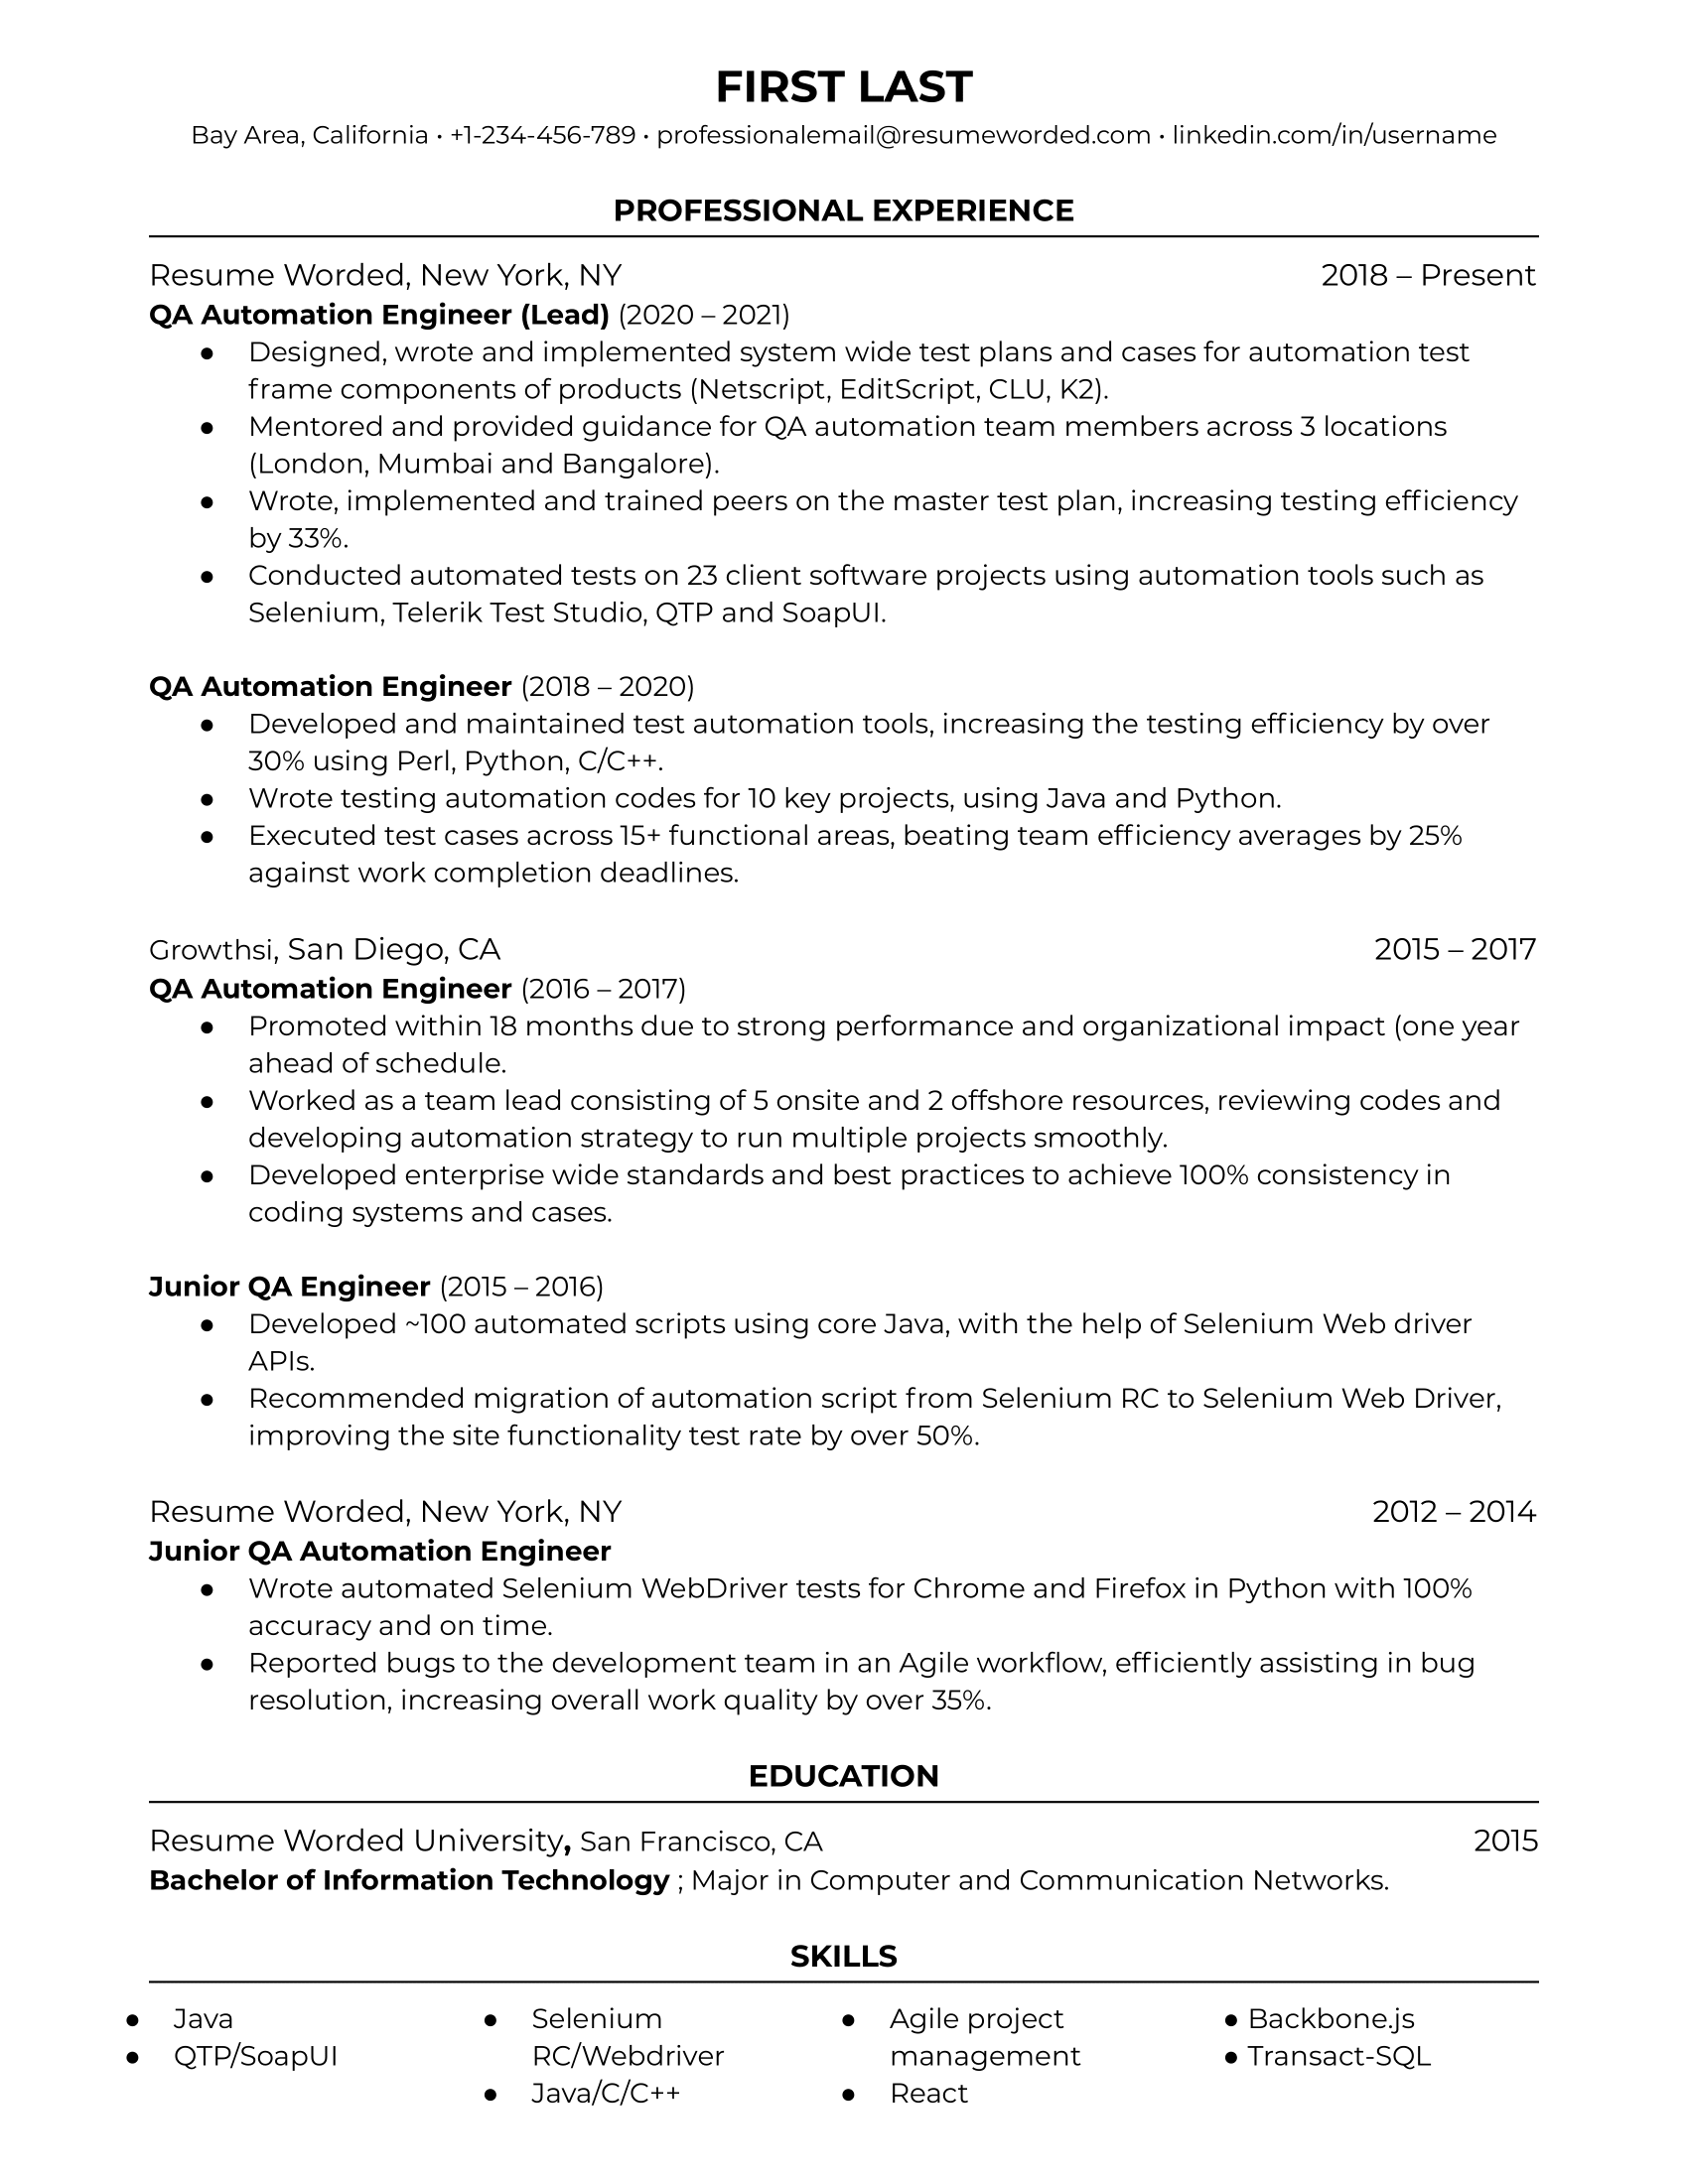 QA automation engineer resume sample that quantifies the applicant's success and updated skills set